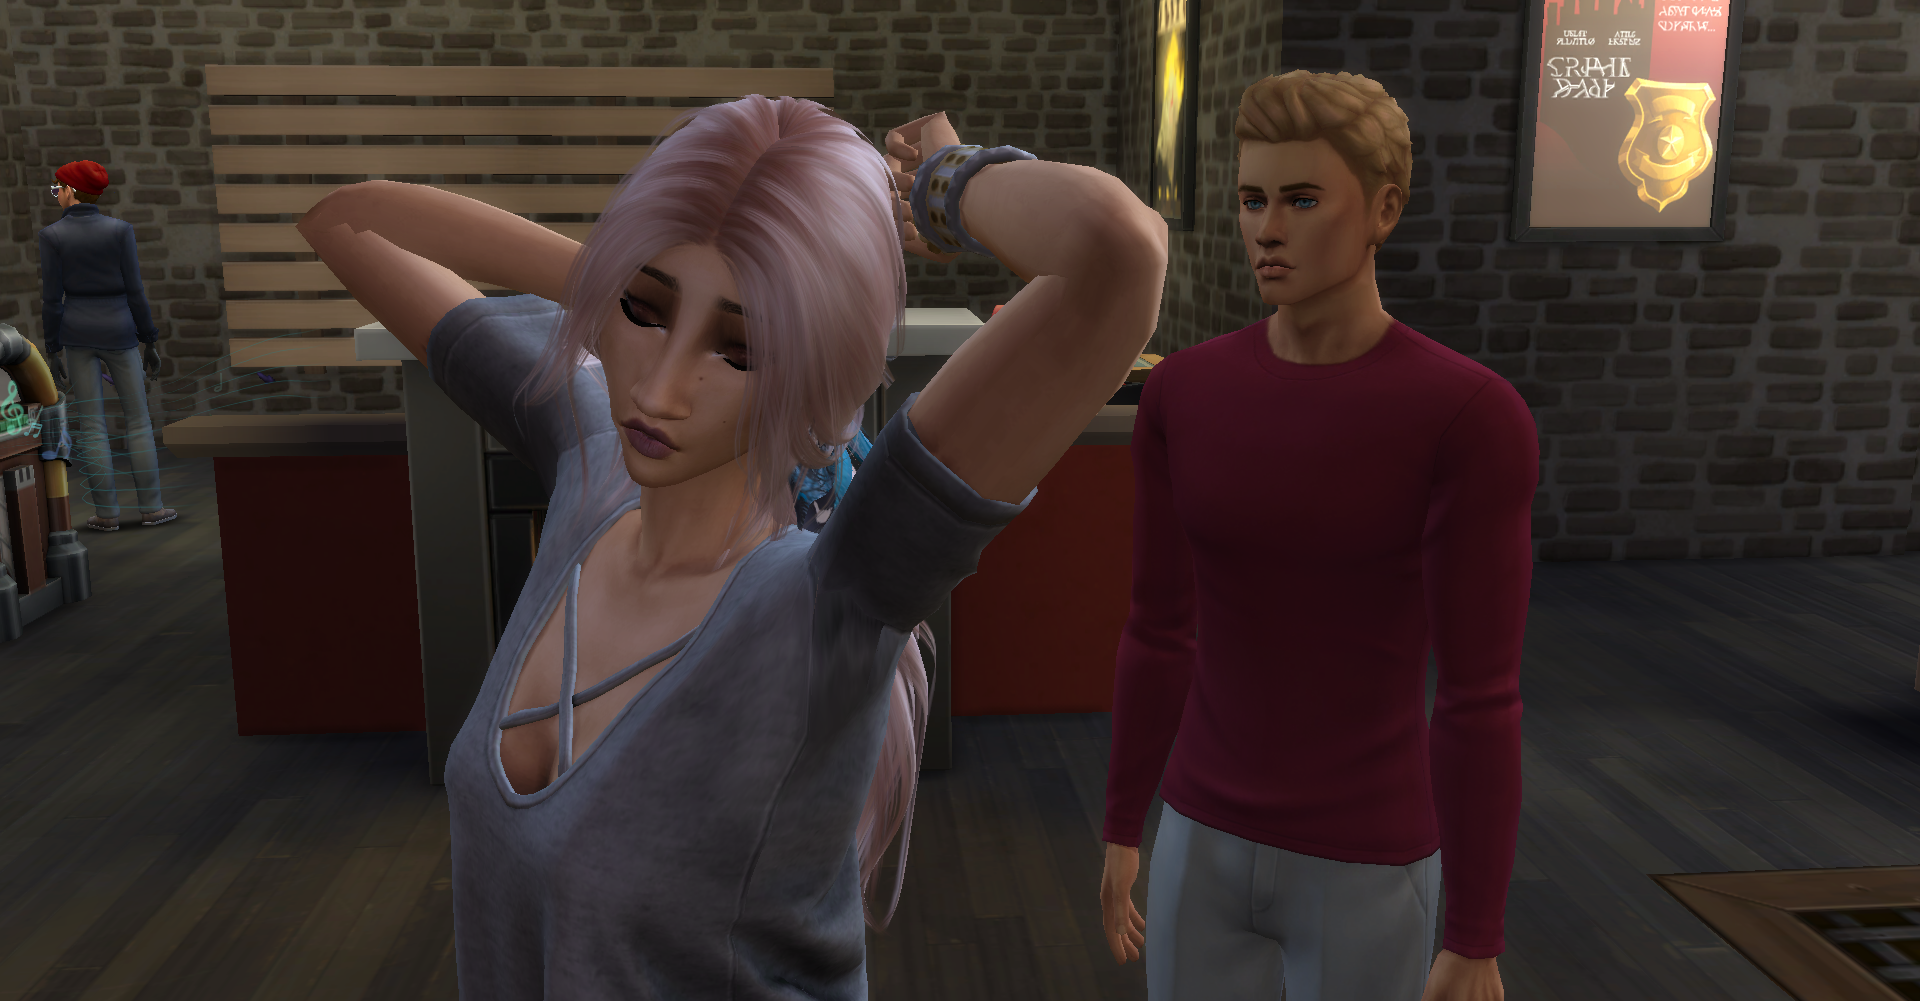 lothario-pt7-24.png.81f439ad0080f19331c268256e115df9.png